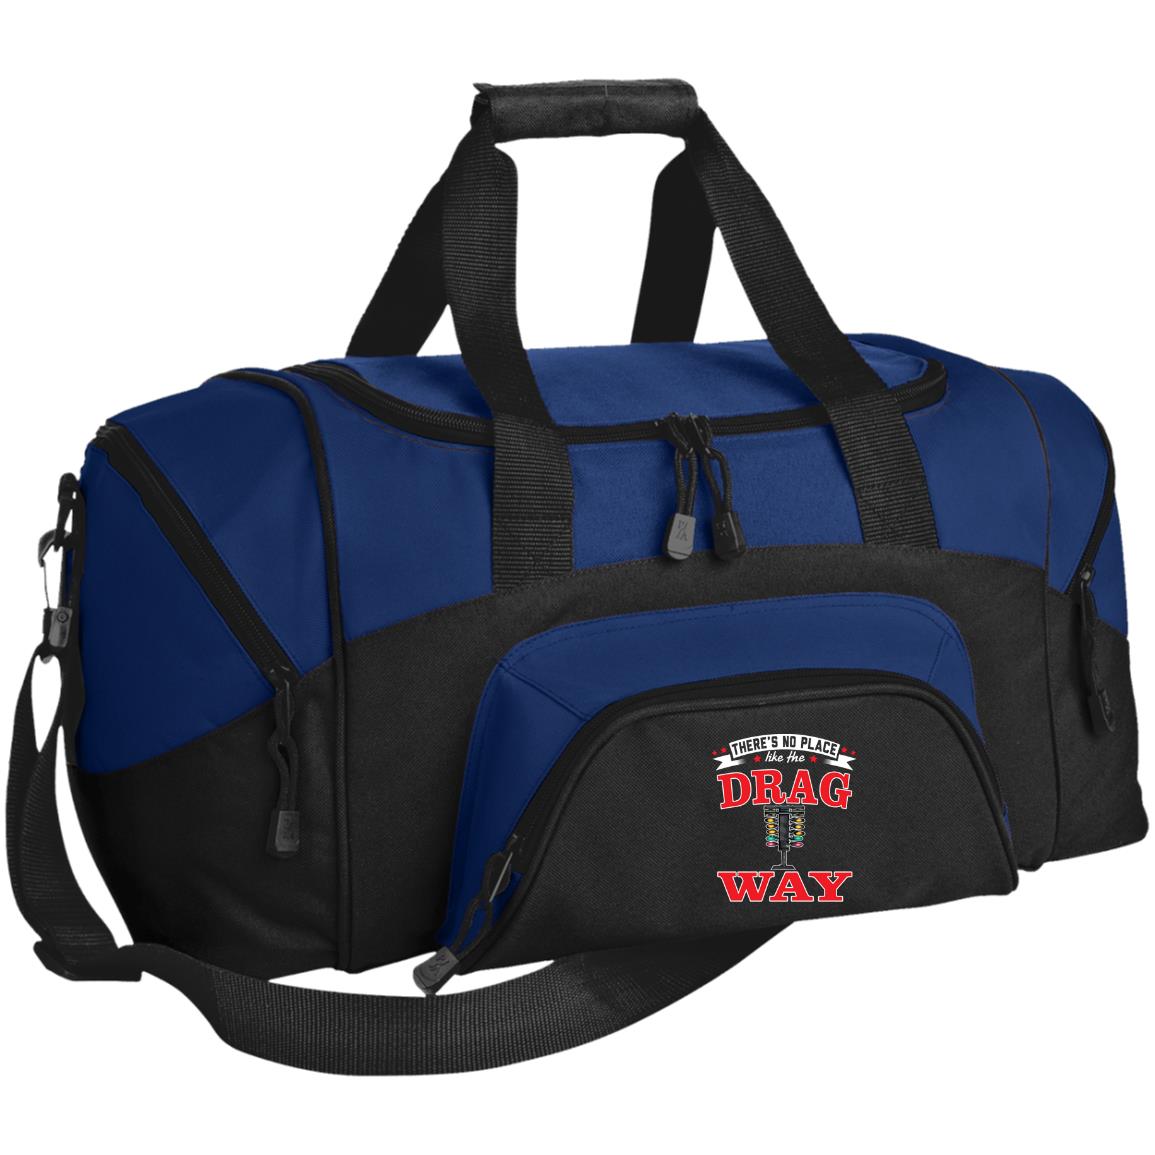 There's No Place Like The Dragway Small Colorblock Sport Duffel Bag